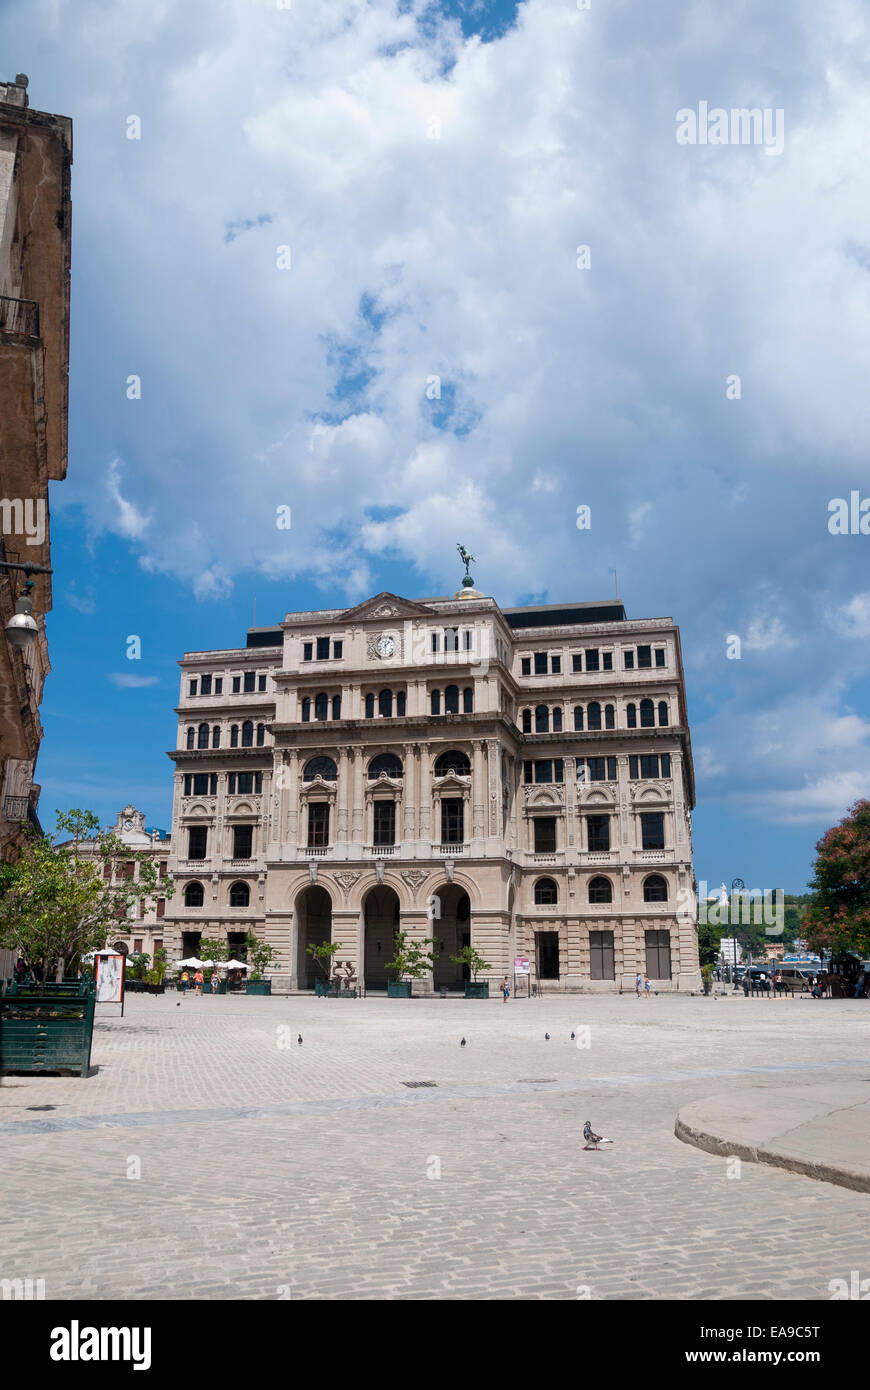 The Lonja del Comercio (Chamber of Commerce) and former stock exchange at the Plaza de San Francisco Asís in Old Havana, Cuba Stock Photo